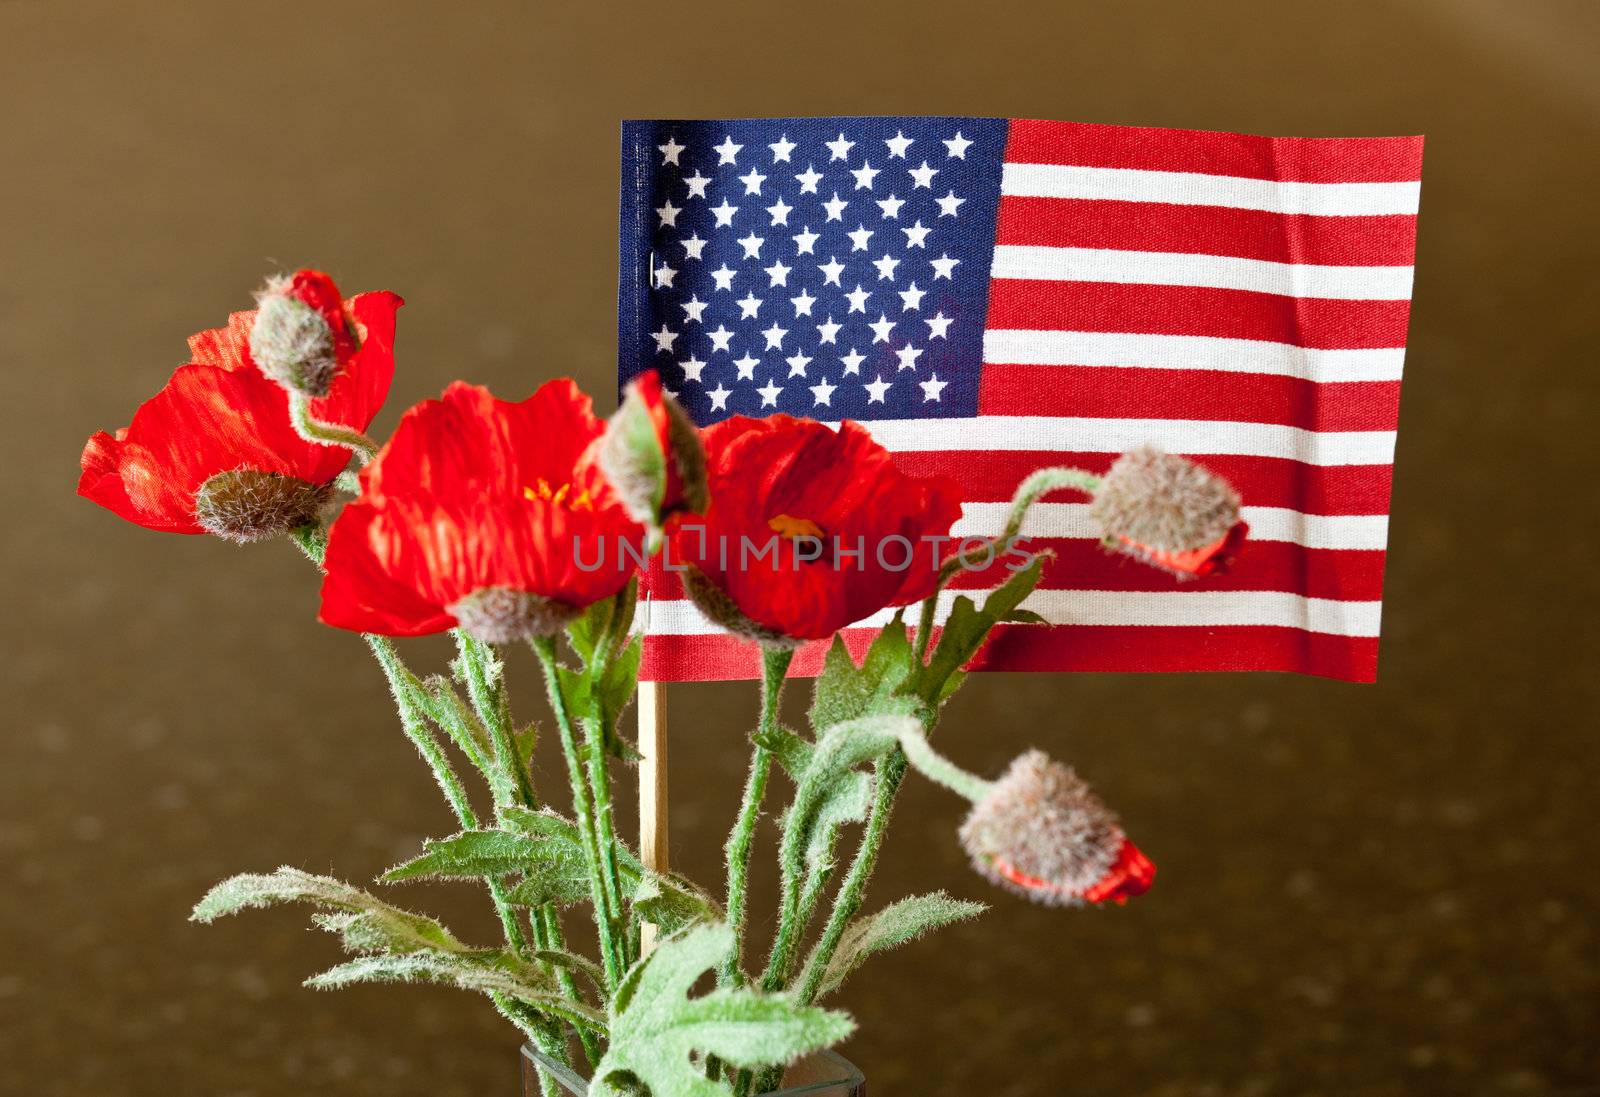 Small toy flag of stars and stripes with artificial flowers surrounding the flag as if made by a child